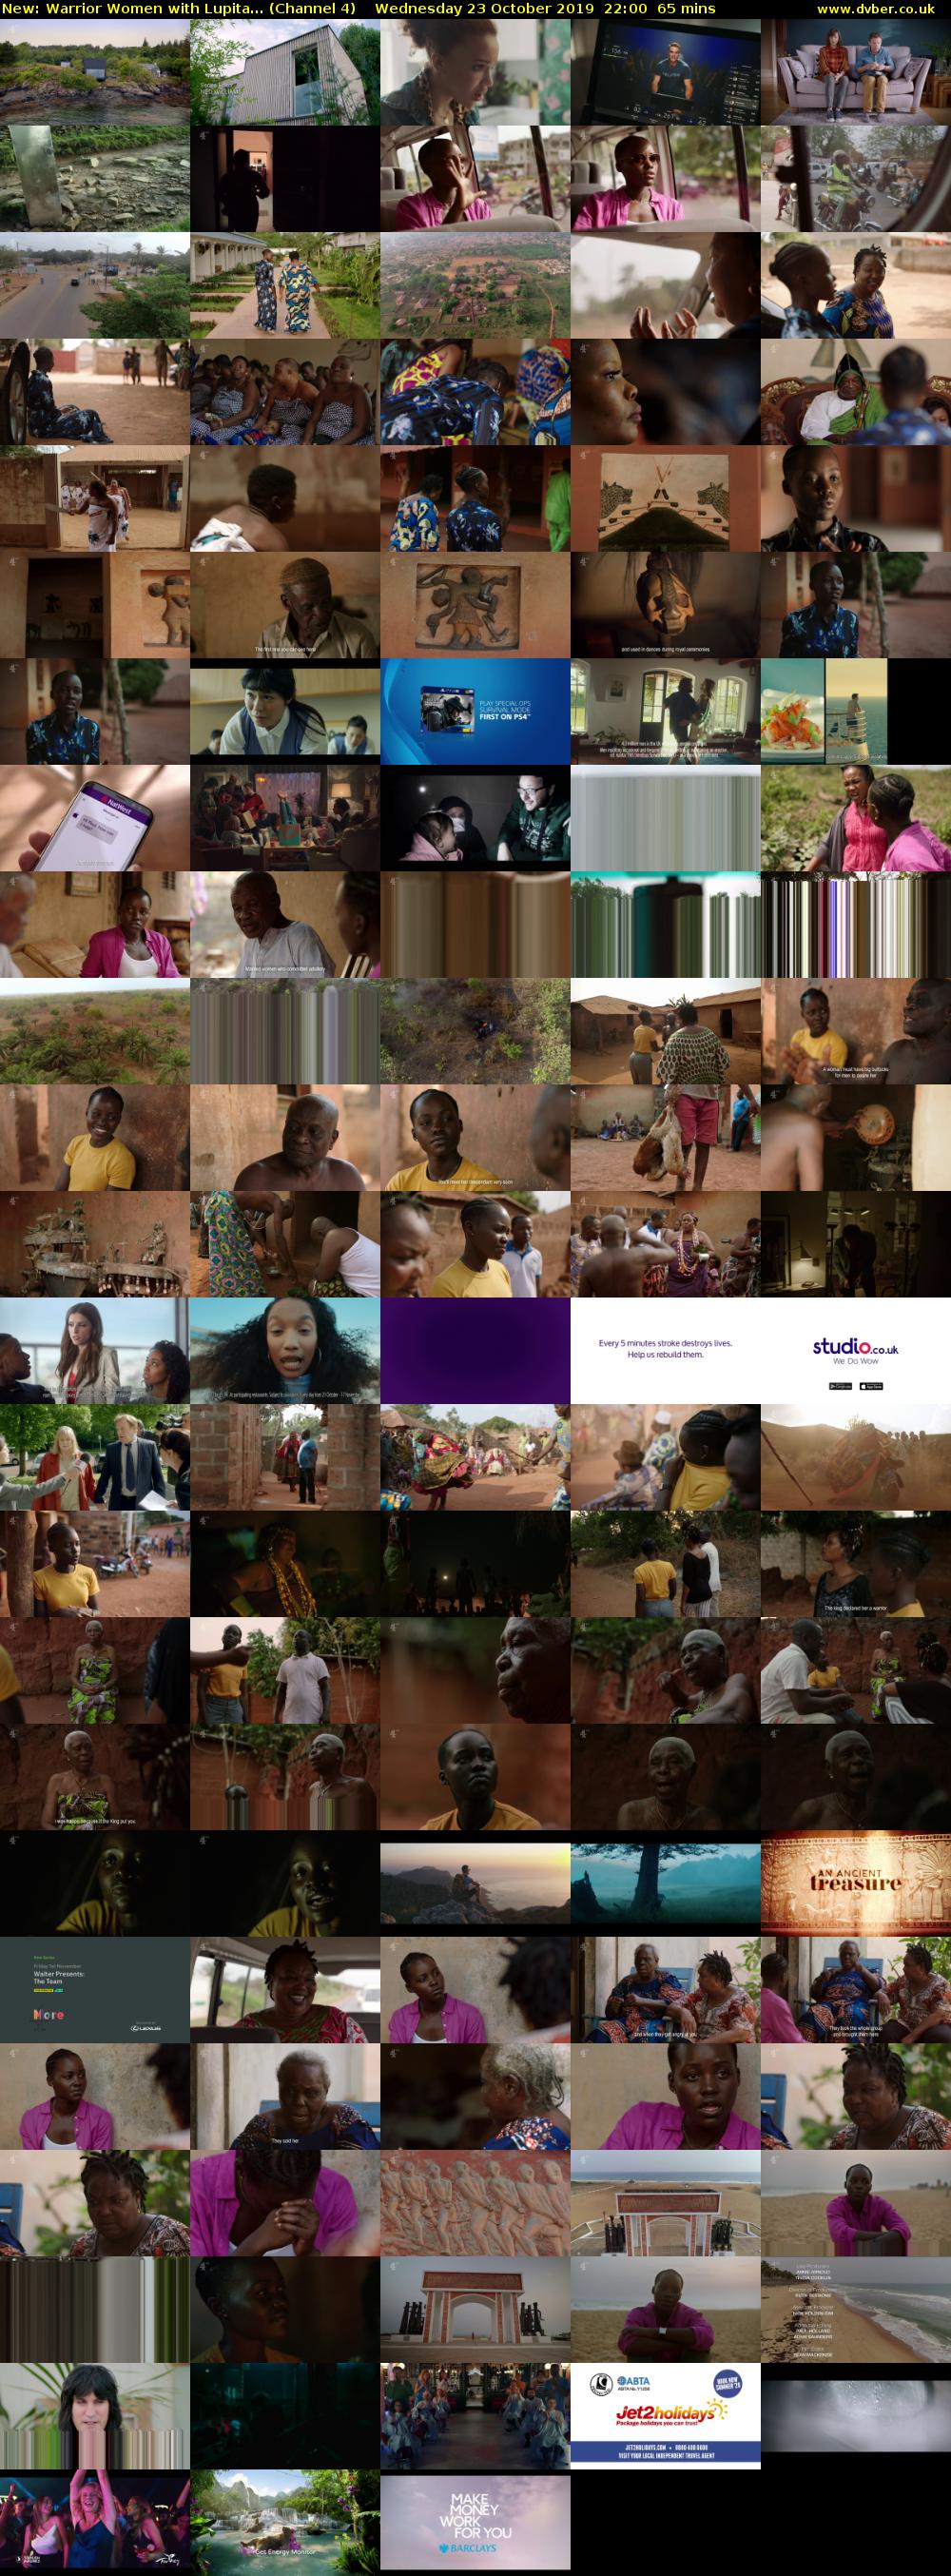 Warrior Women with Lupita... (Channel 4) Wednesday 23 October 2019 22:00 - 23:05